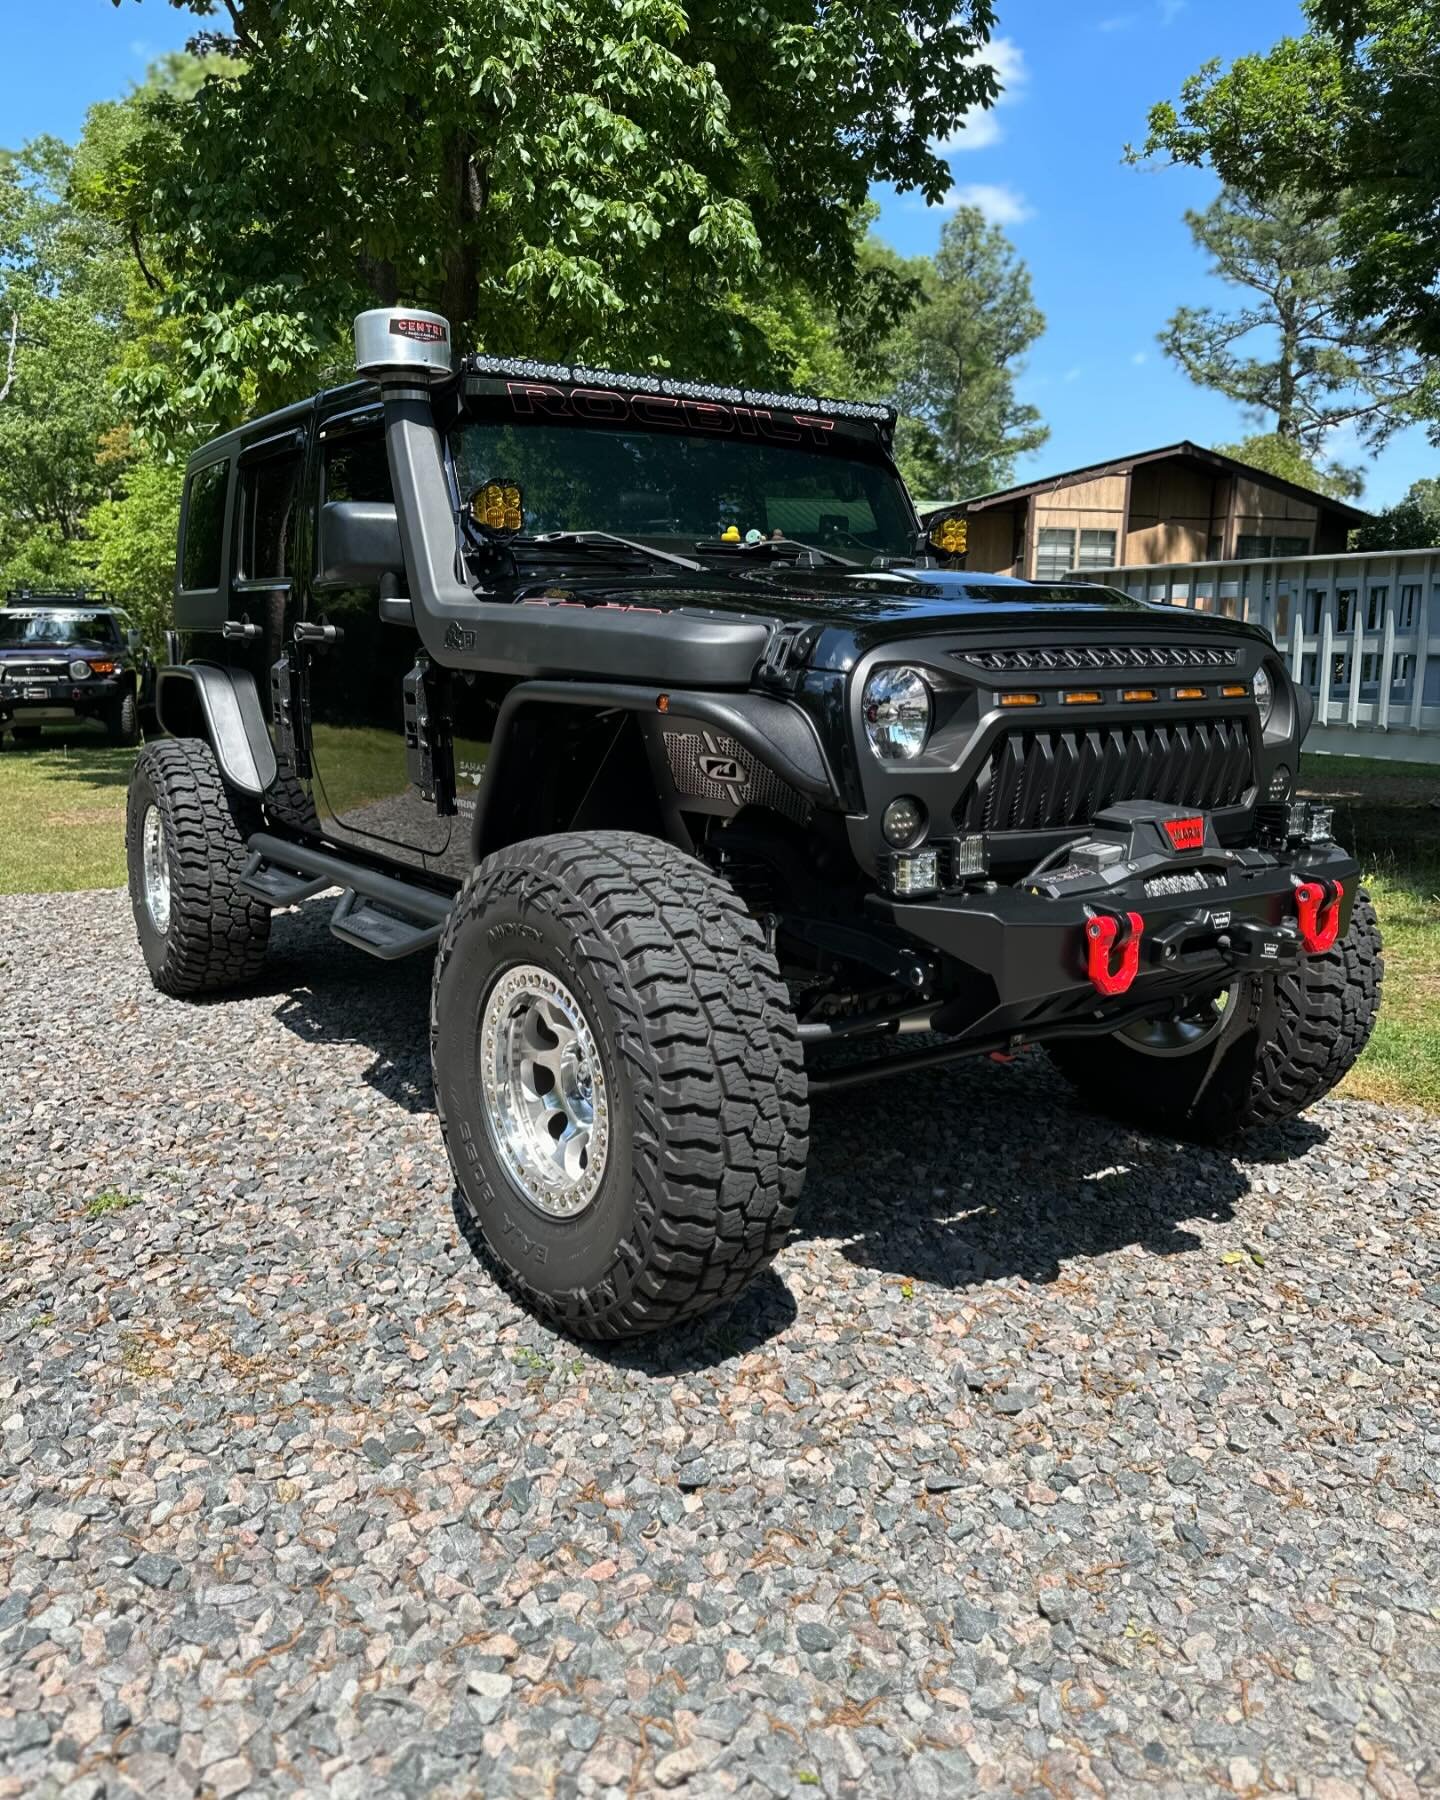 One of the two in the collection of Mr. Freddie&rsquo;s that got a little shine sauce today. 

  2016 Jeep Wrangler built by ROC
  2002 Chevrolet Camaro Z28 (not pictured)

✅ ECCD Decon Wash and Clay

✅ ECCD Polishing touch ups

✅ ECCD Gloss and Prot